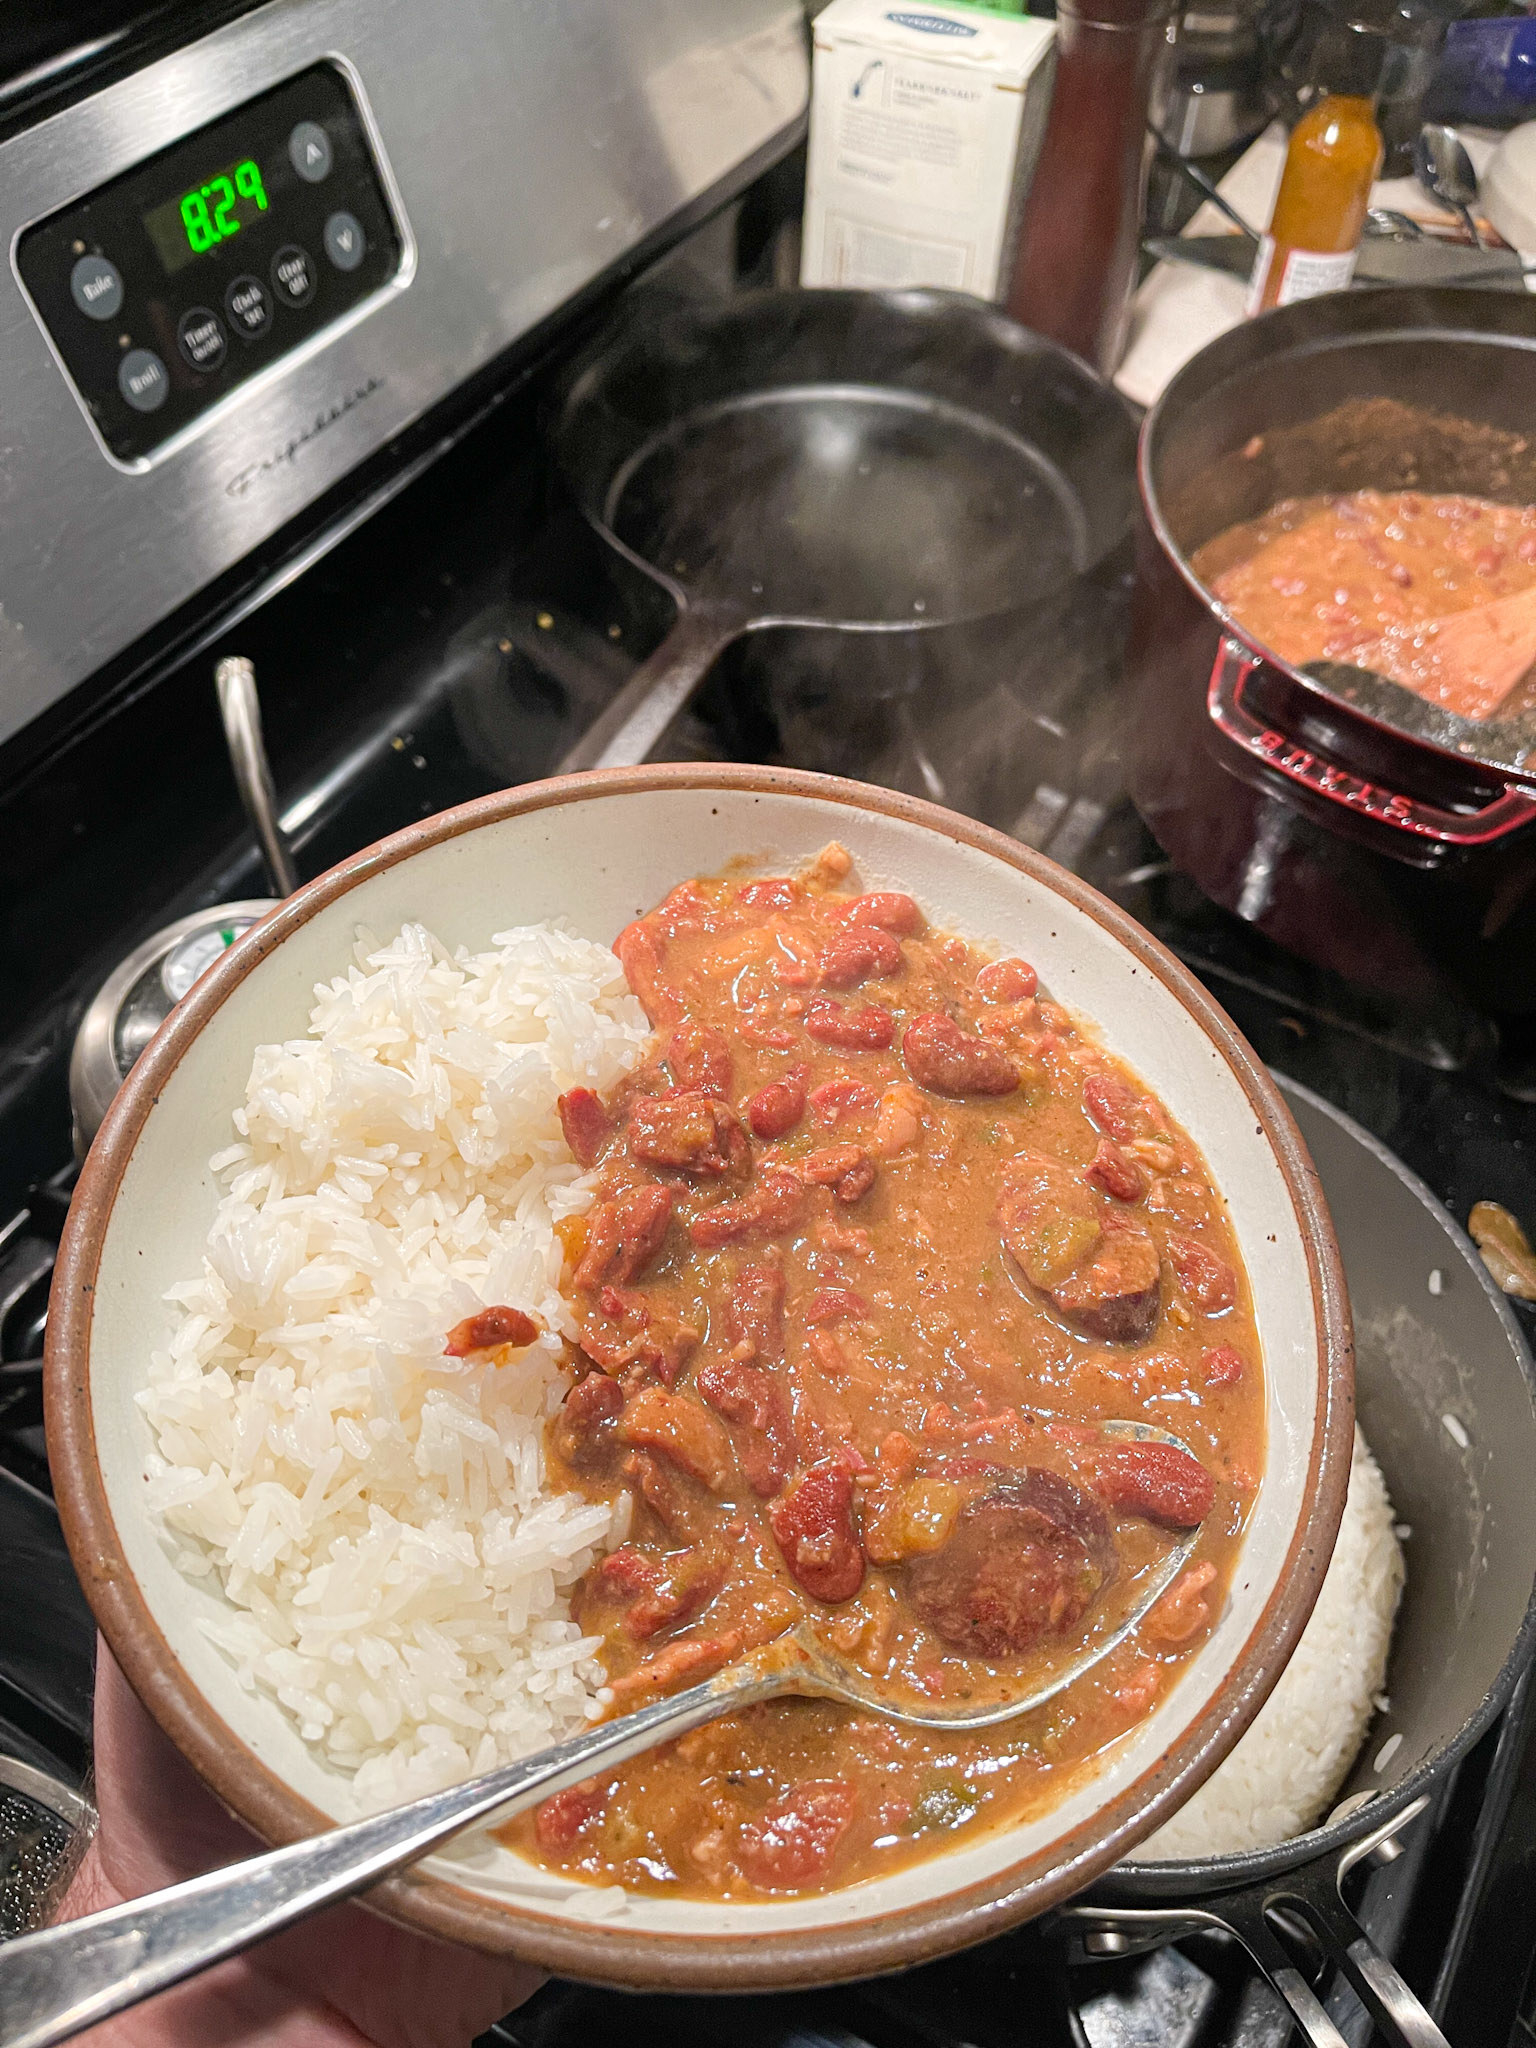 Red beans and rice in a bowl, served